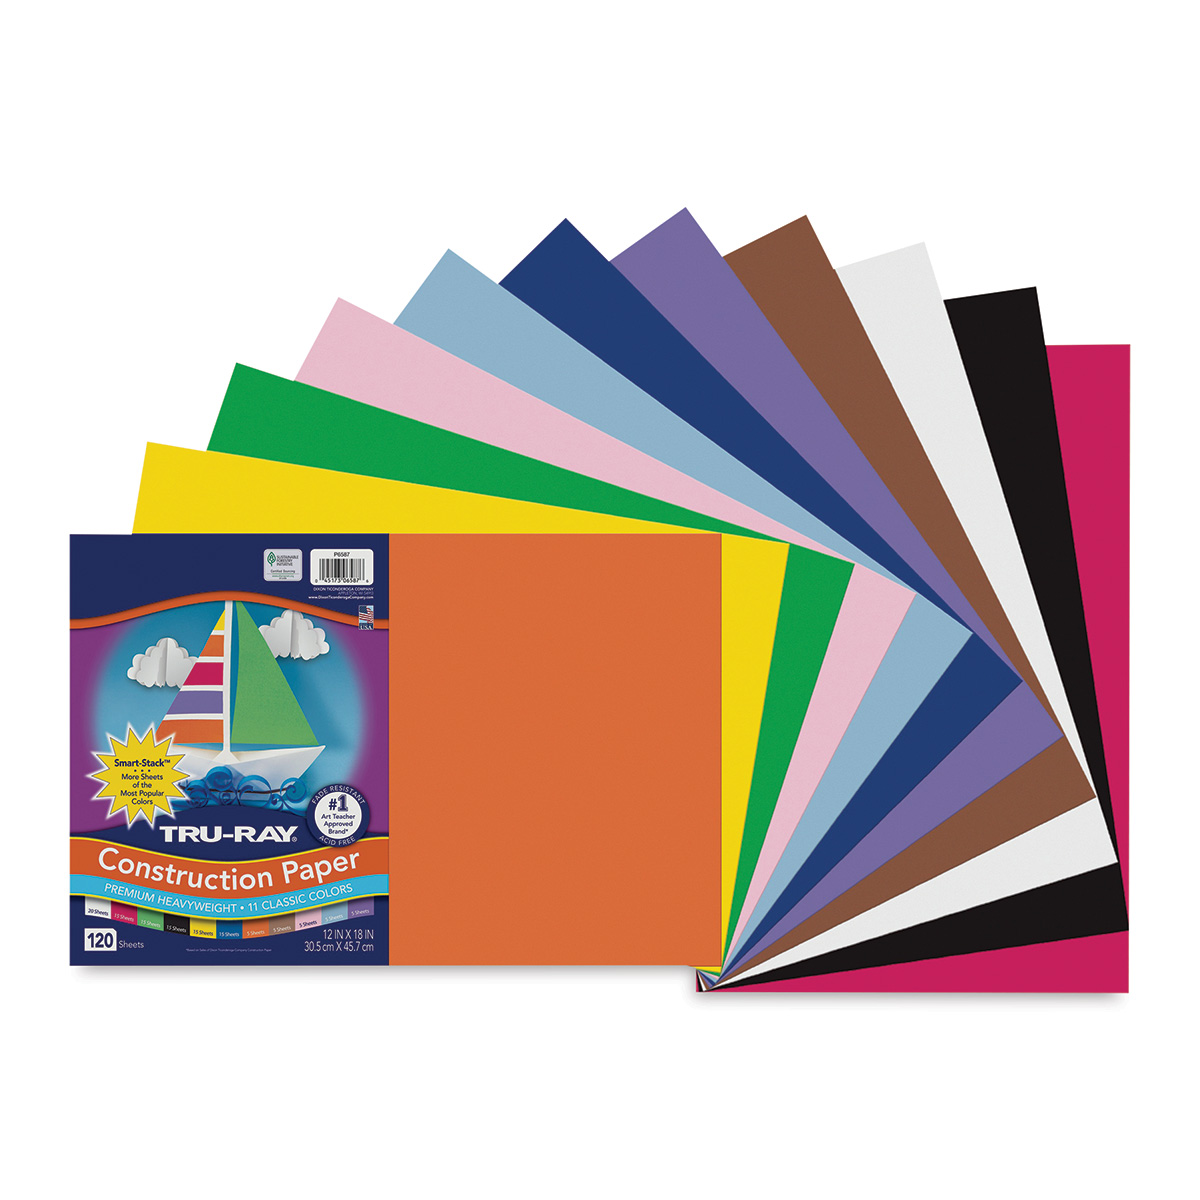 Pacon Tru-Ray Construction Paper - 12' x 18', Smart Stack, 120 Sheets